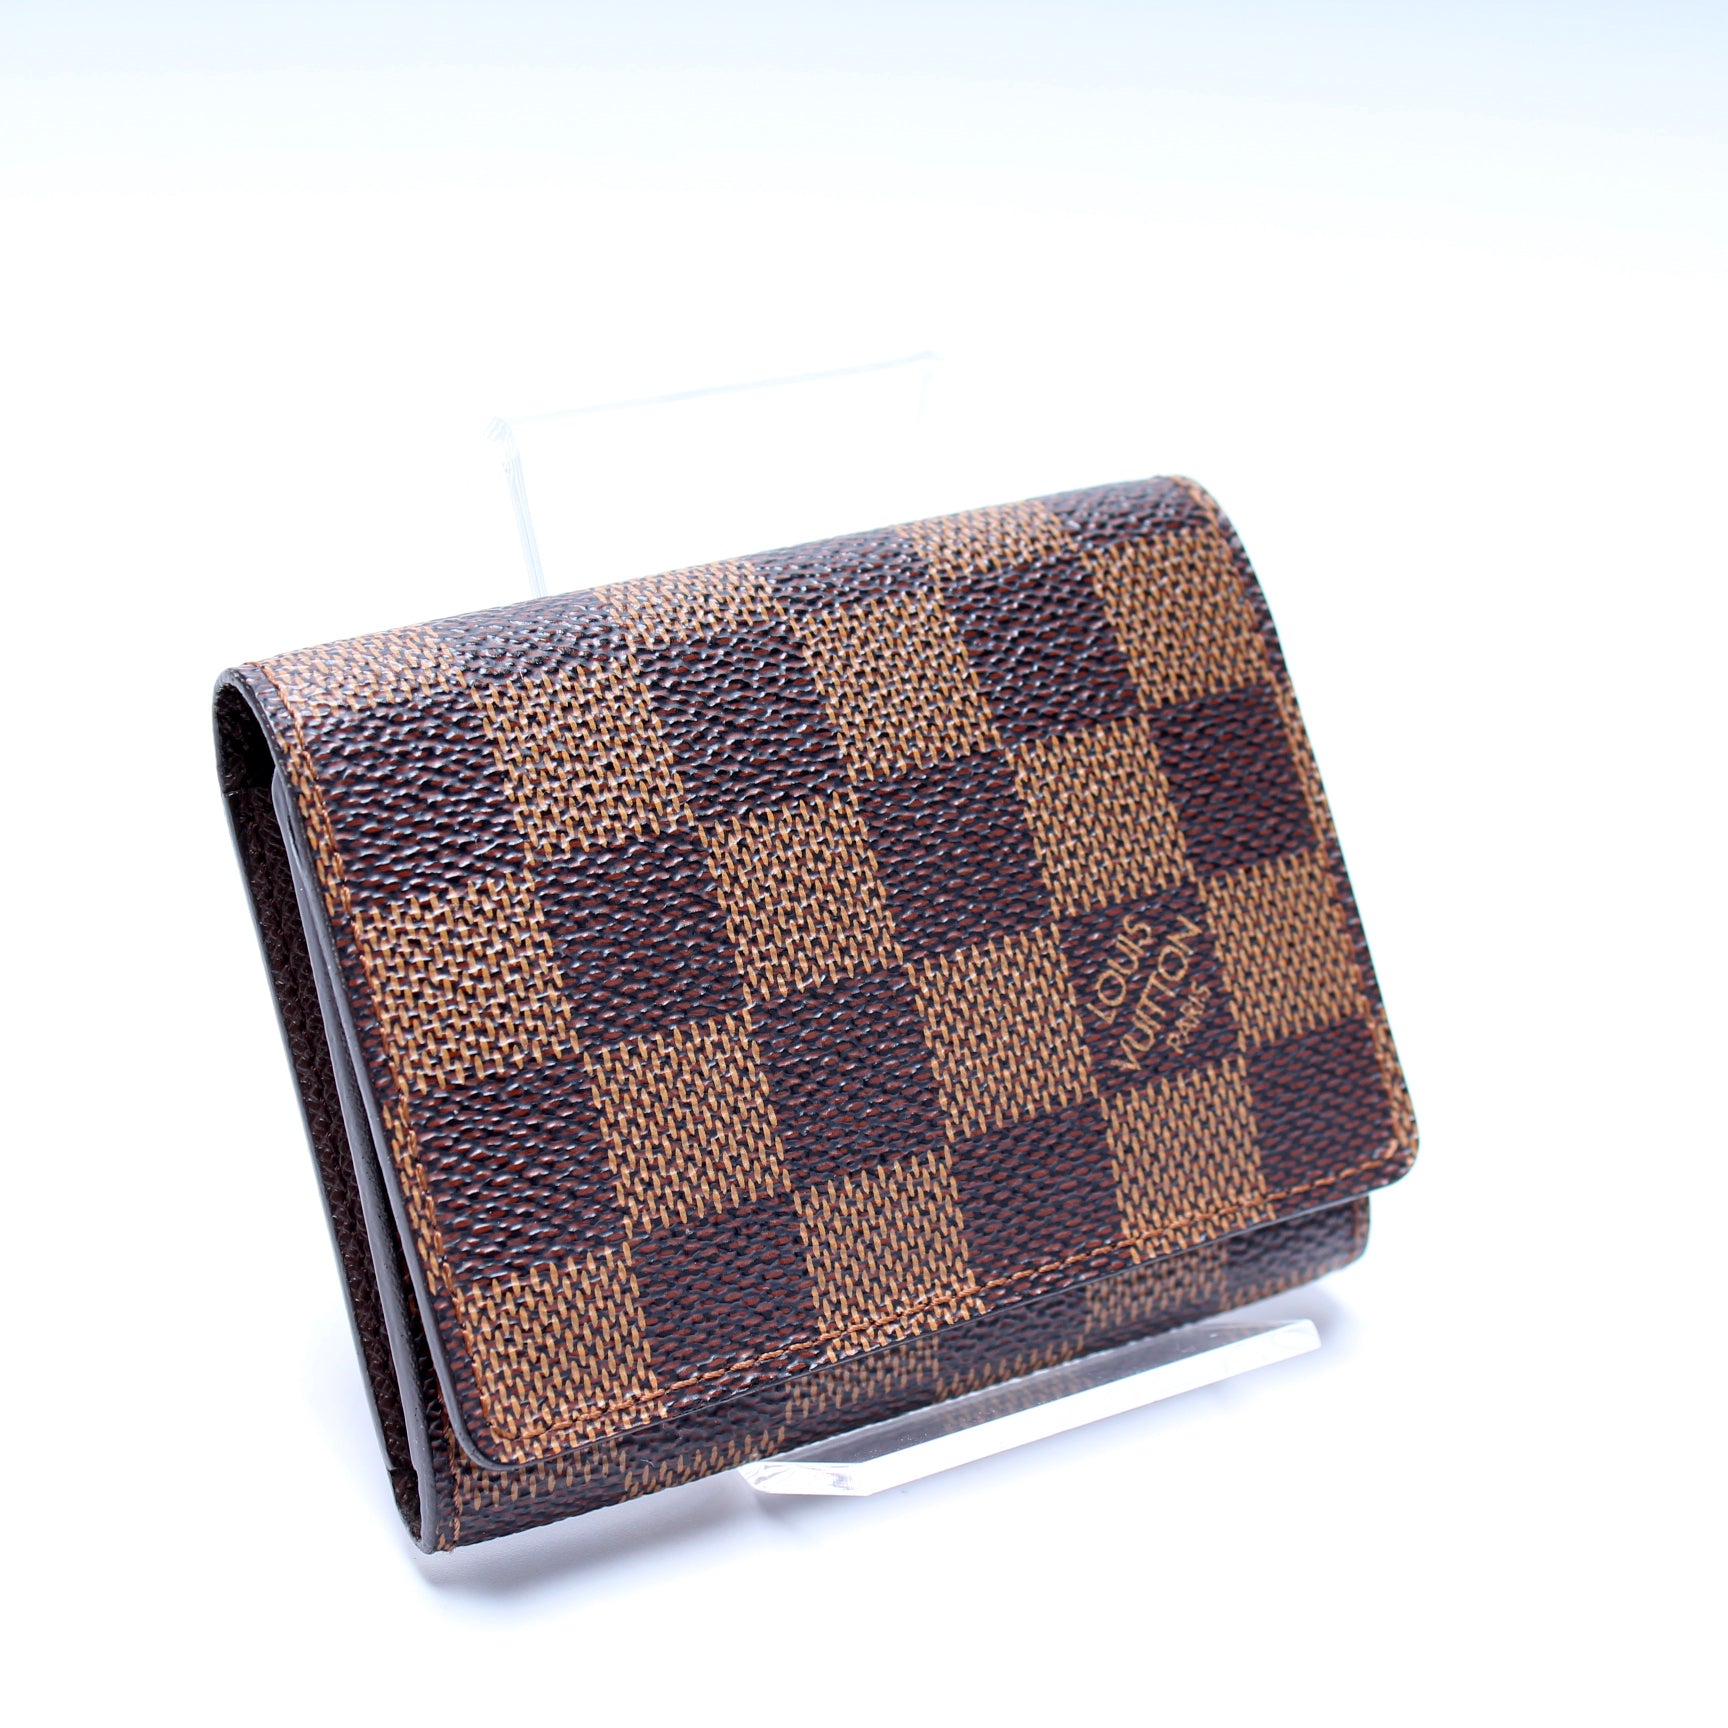 Louis Vuitton Damier Ebene Pattern Coated Canvas Wallet  Brown Wallets  Accessories  LOU699275  The RealReal